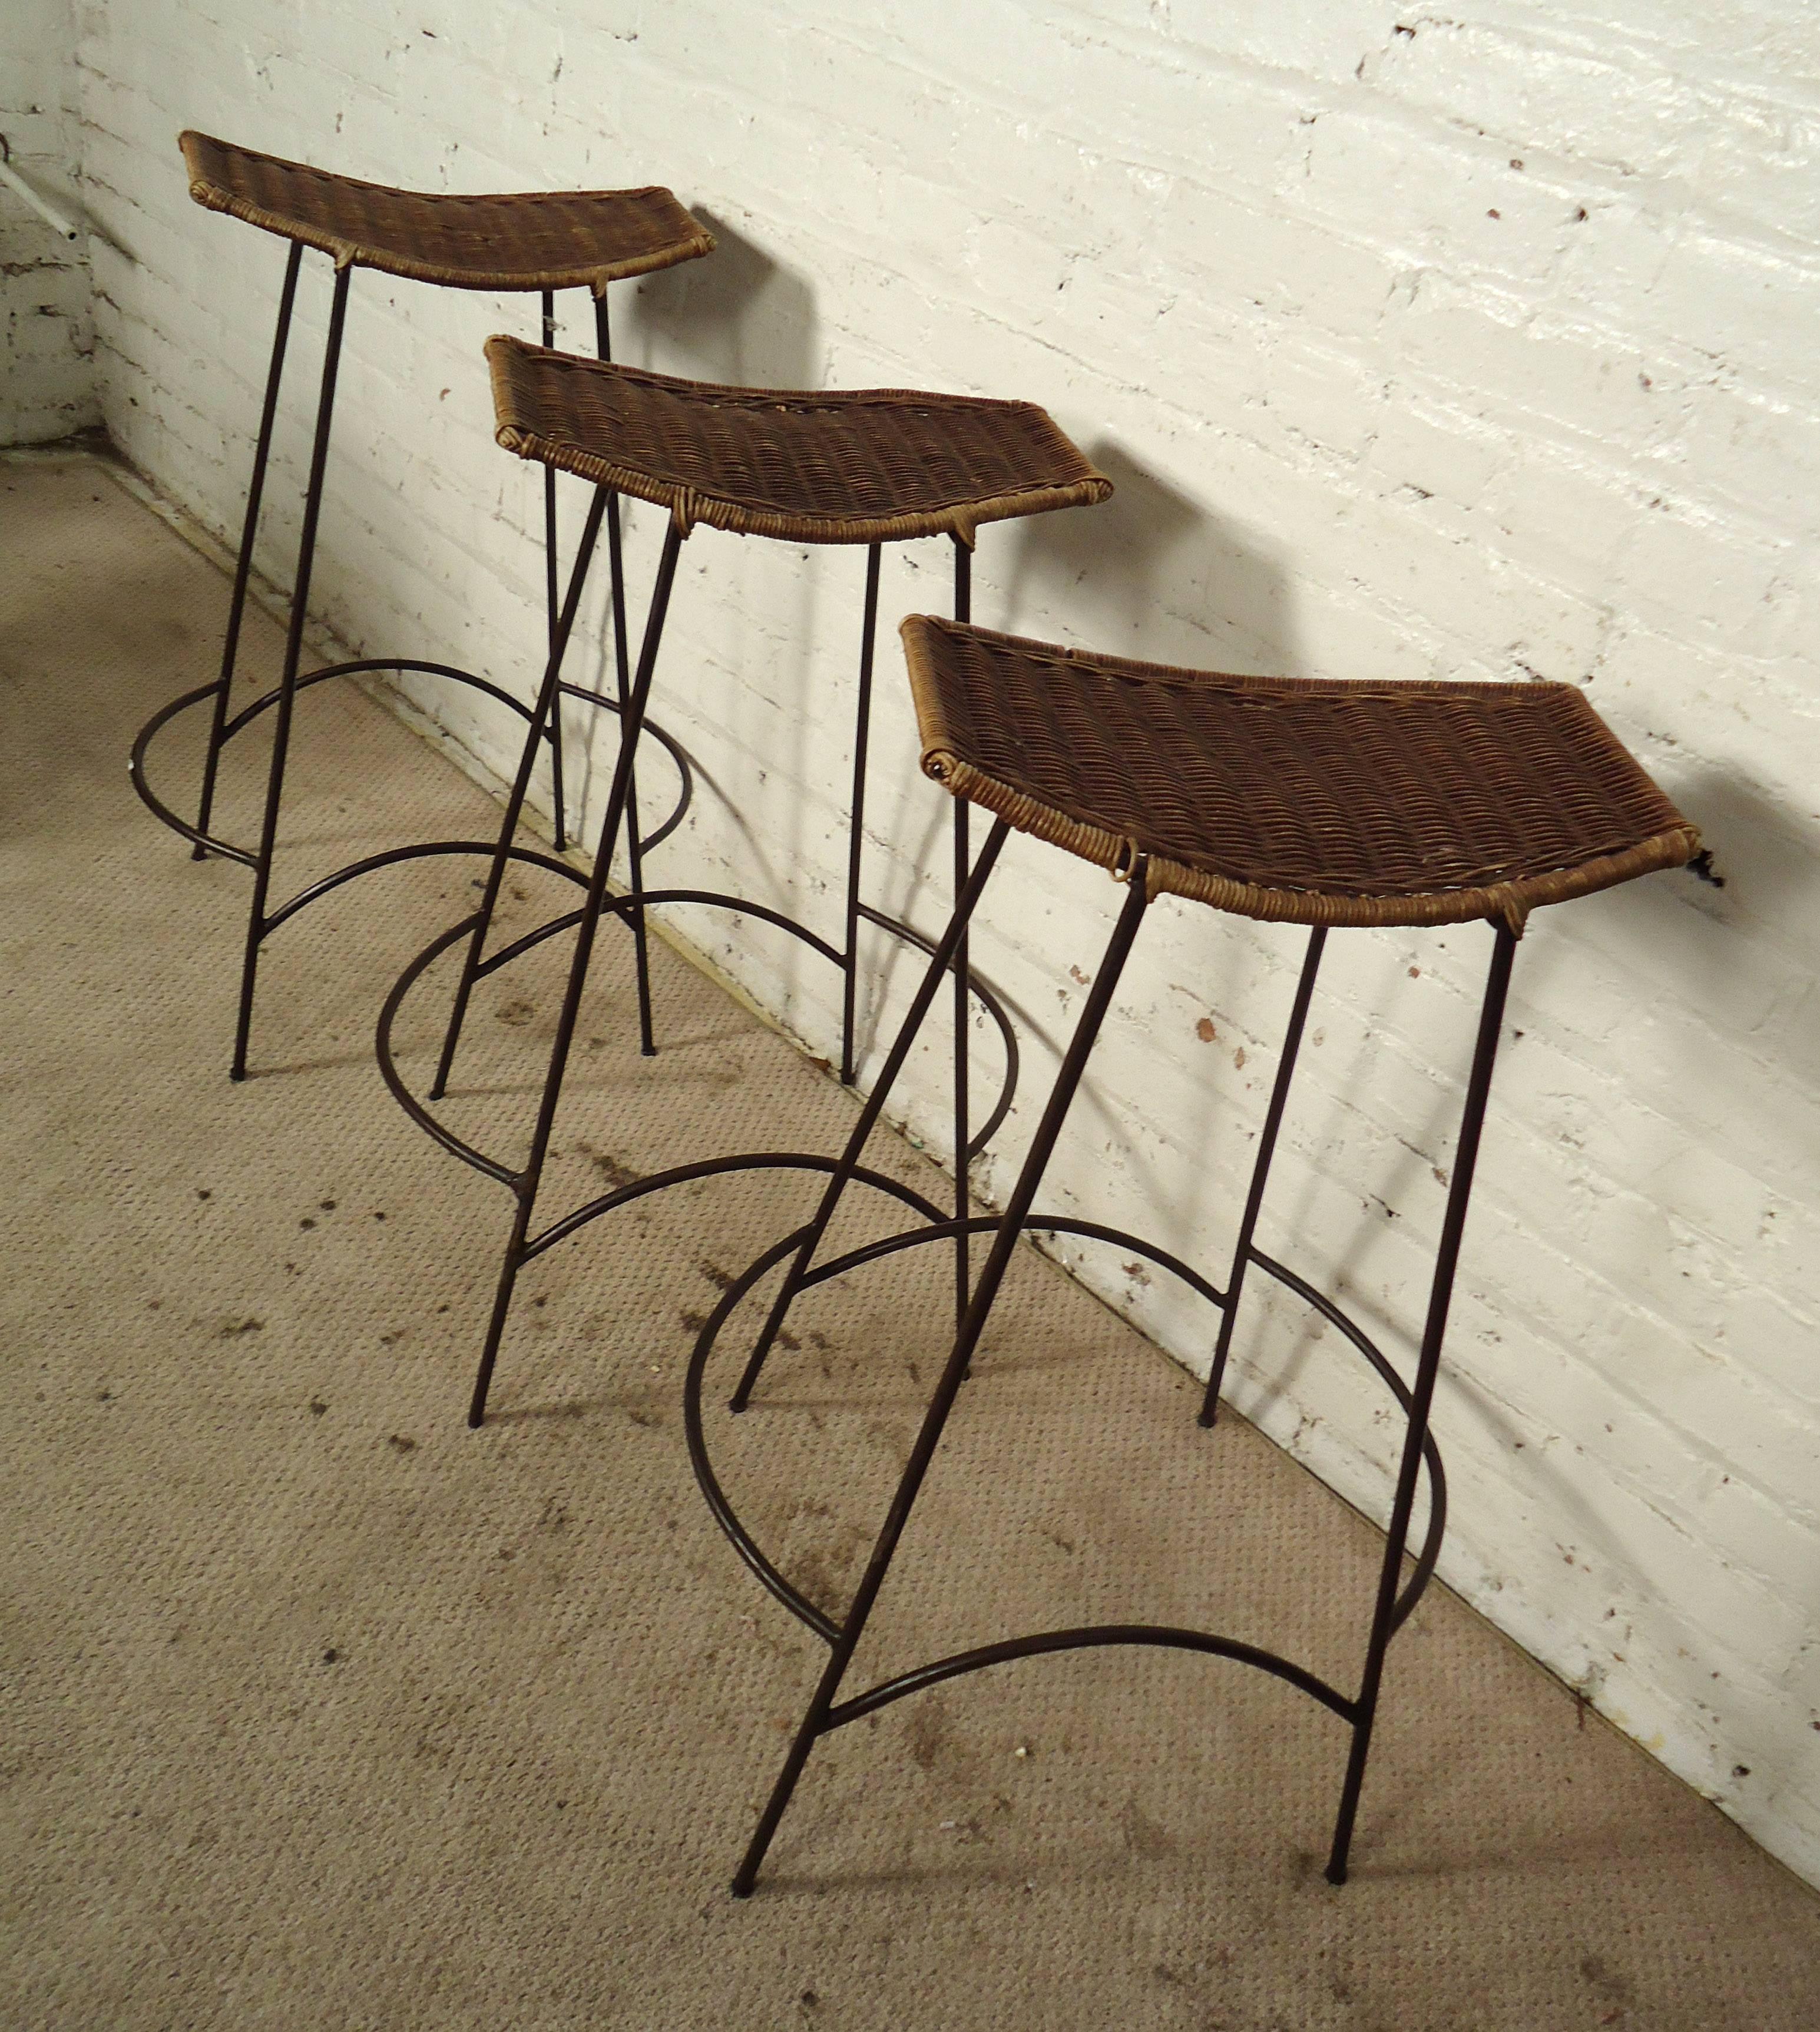 Set of vintage modern Arthur Umanoff-style stools featuring beautifully sculpted iron legs and woven wicker seats.

Please confirm item location NY or NJ with dealer.